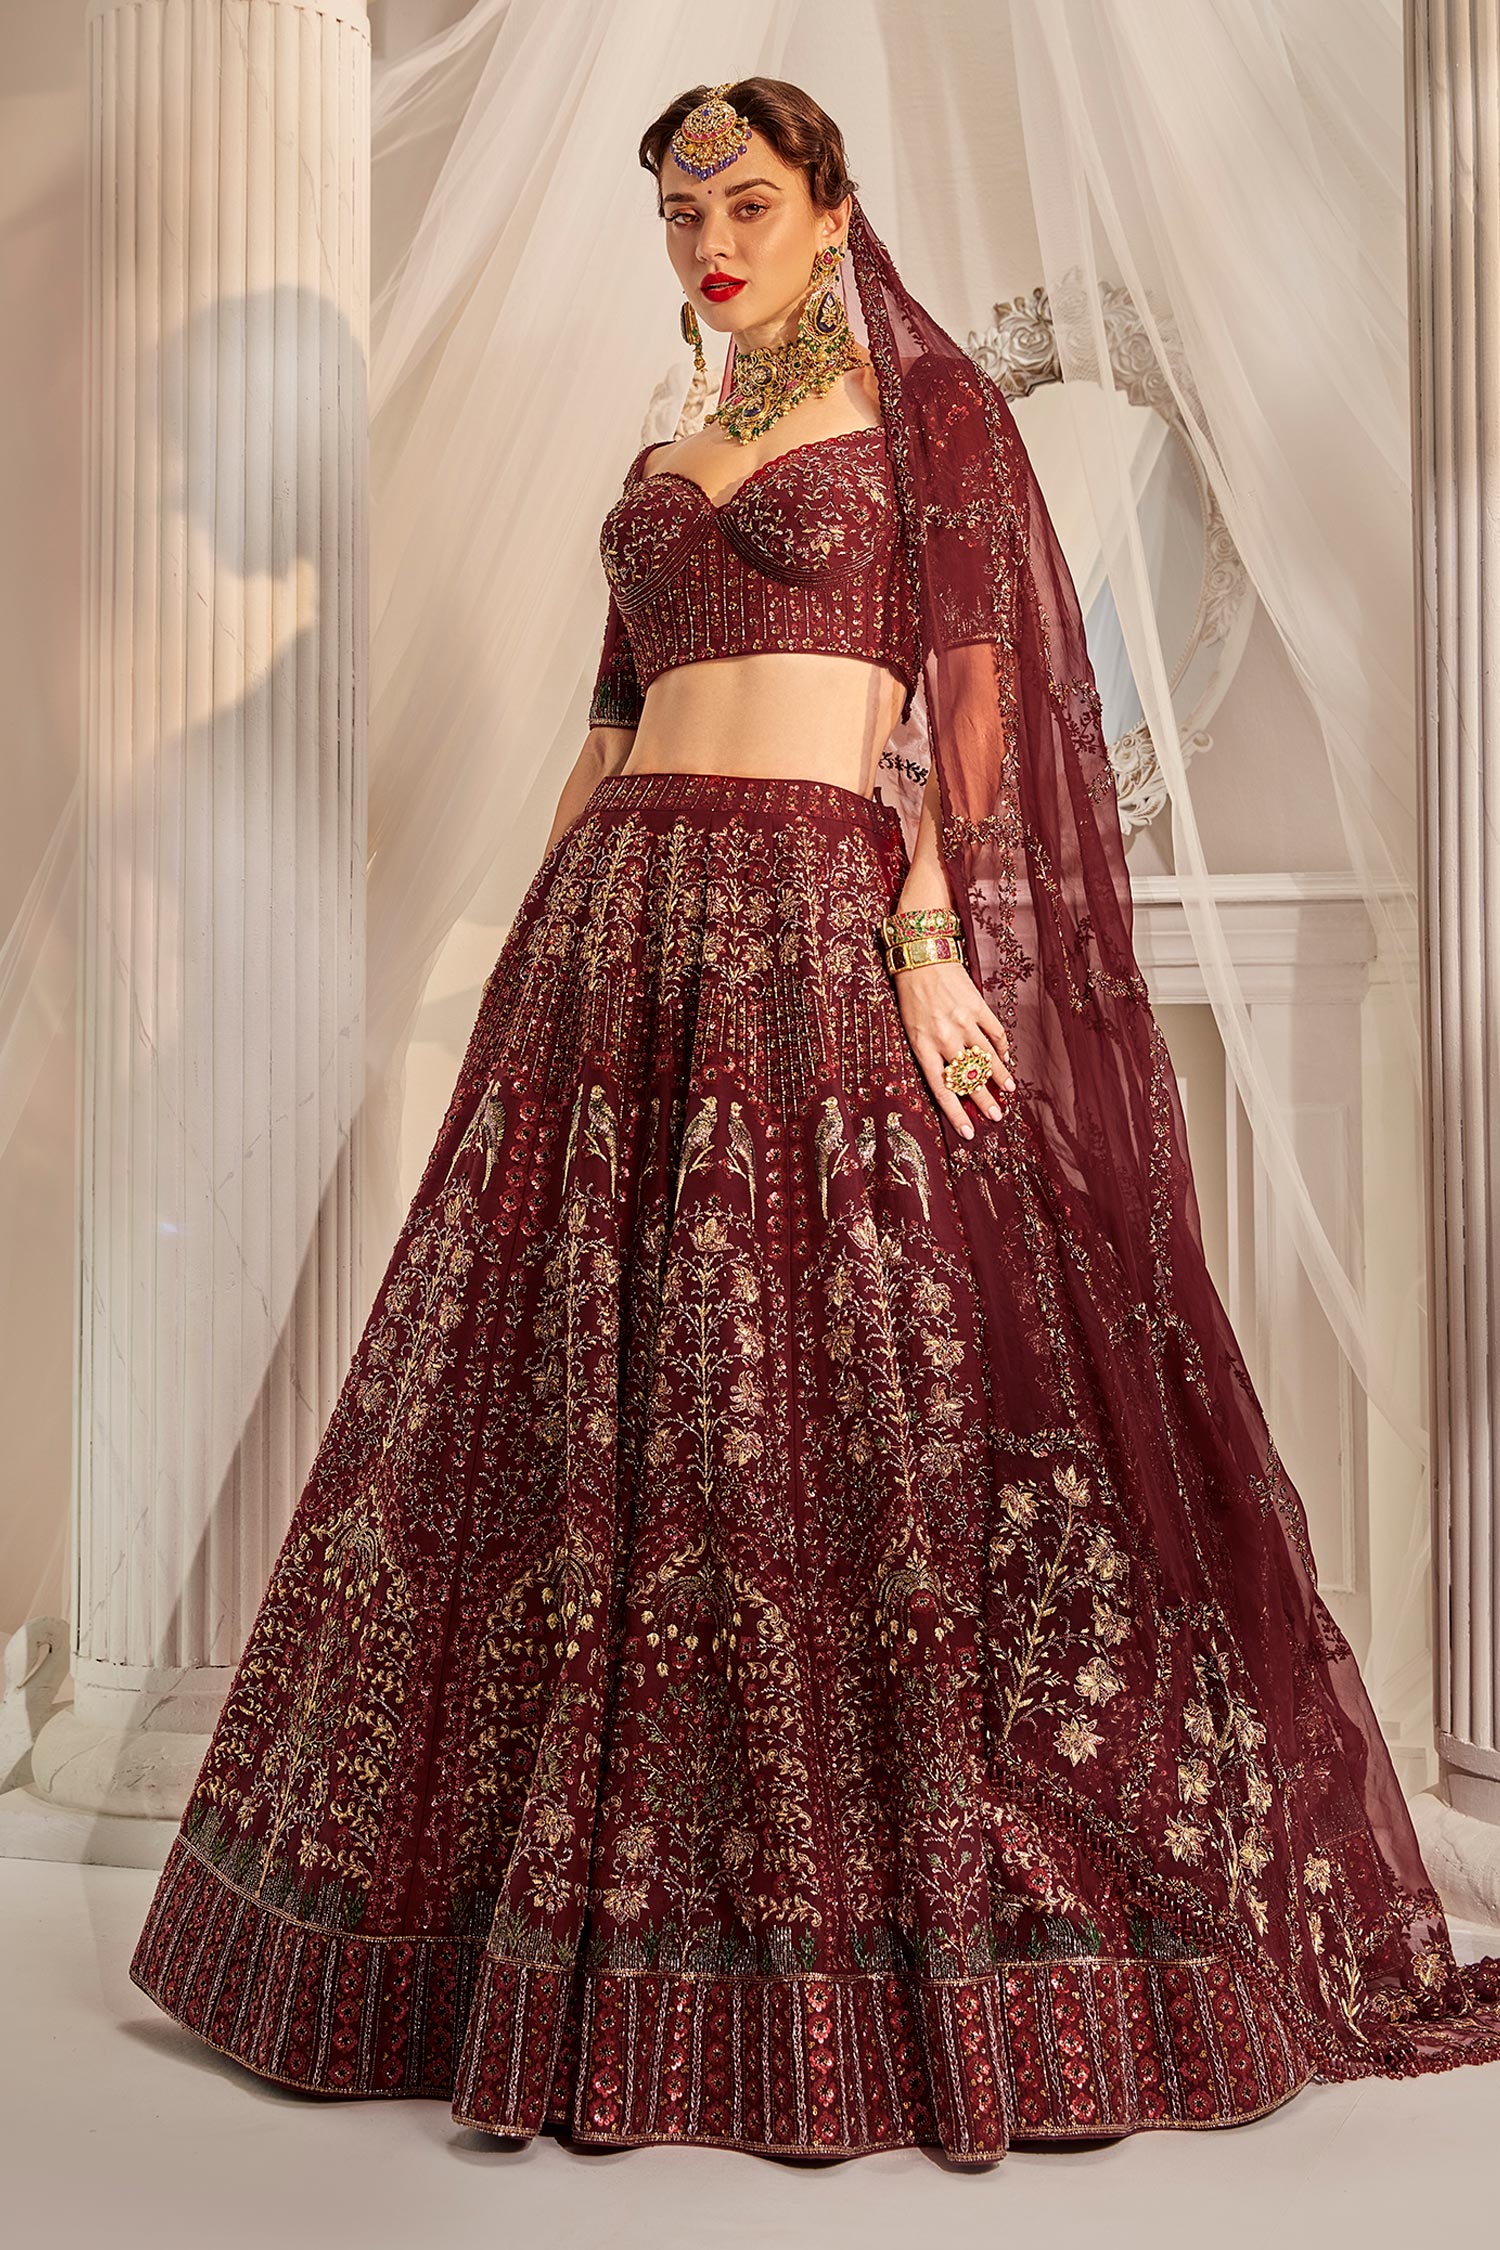 Buy Pink and wine color bridal lehenga in UK, USA and Canada